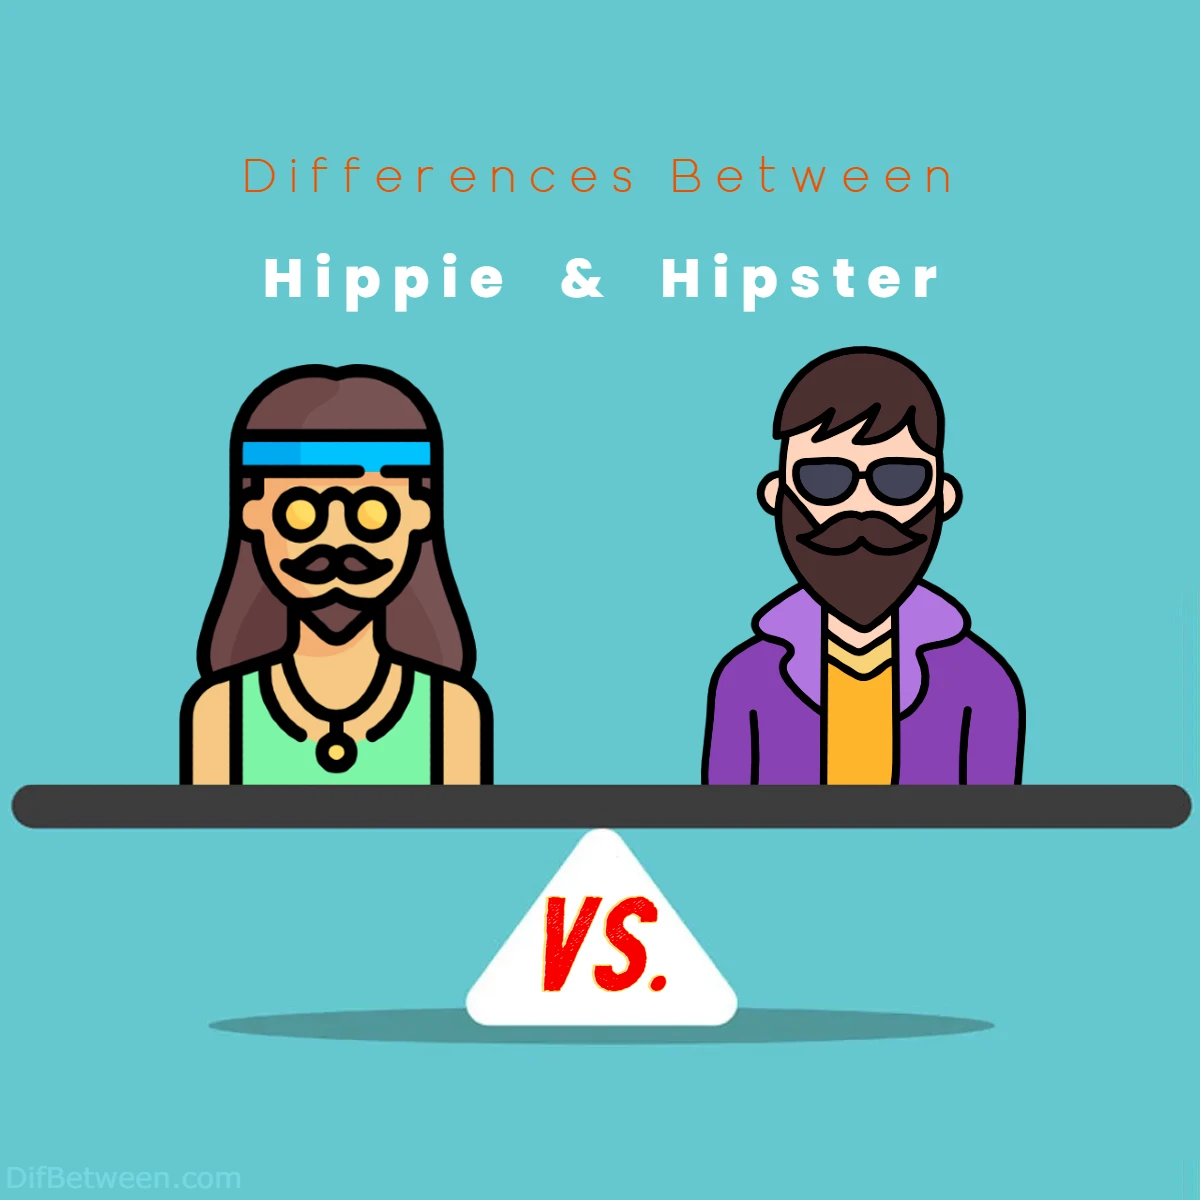 Differences Between Hippie vs Hipster